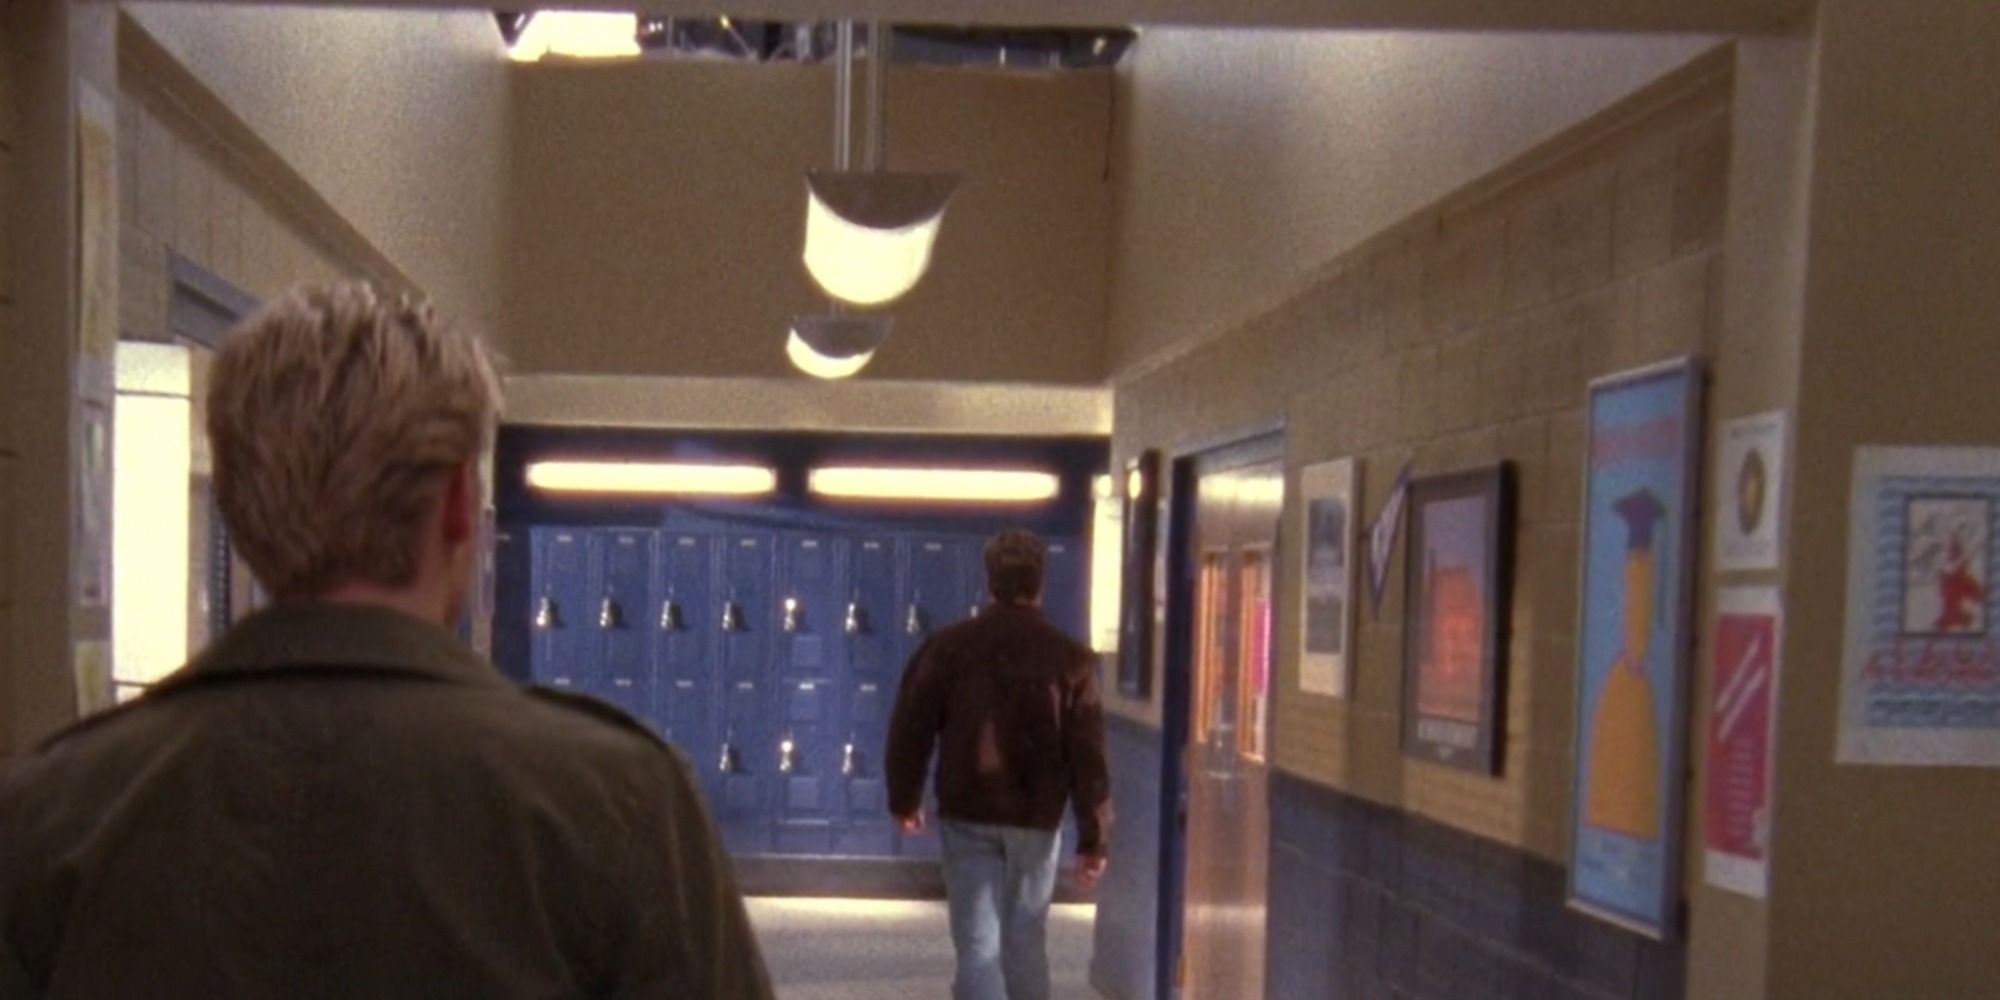 The lighting is exposed on the One Tree Hill high school set